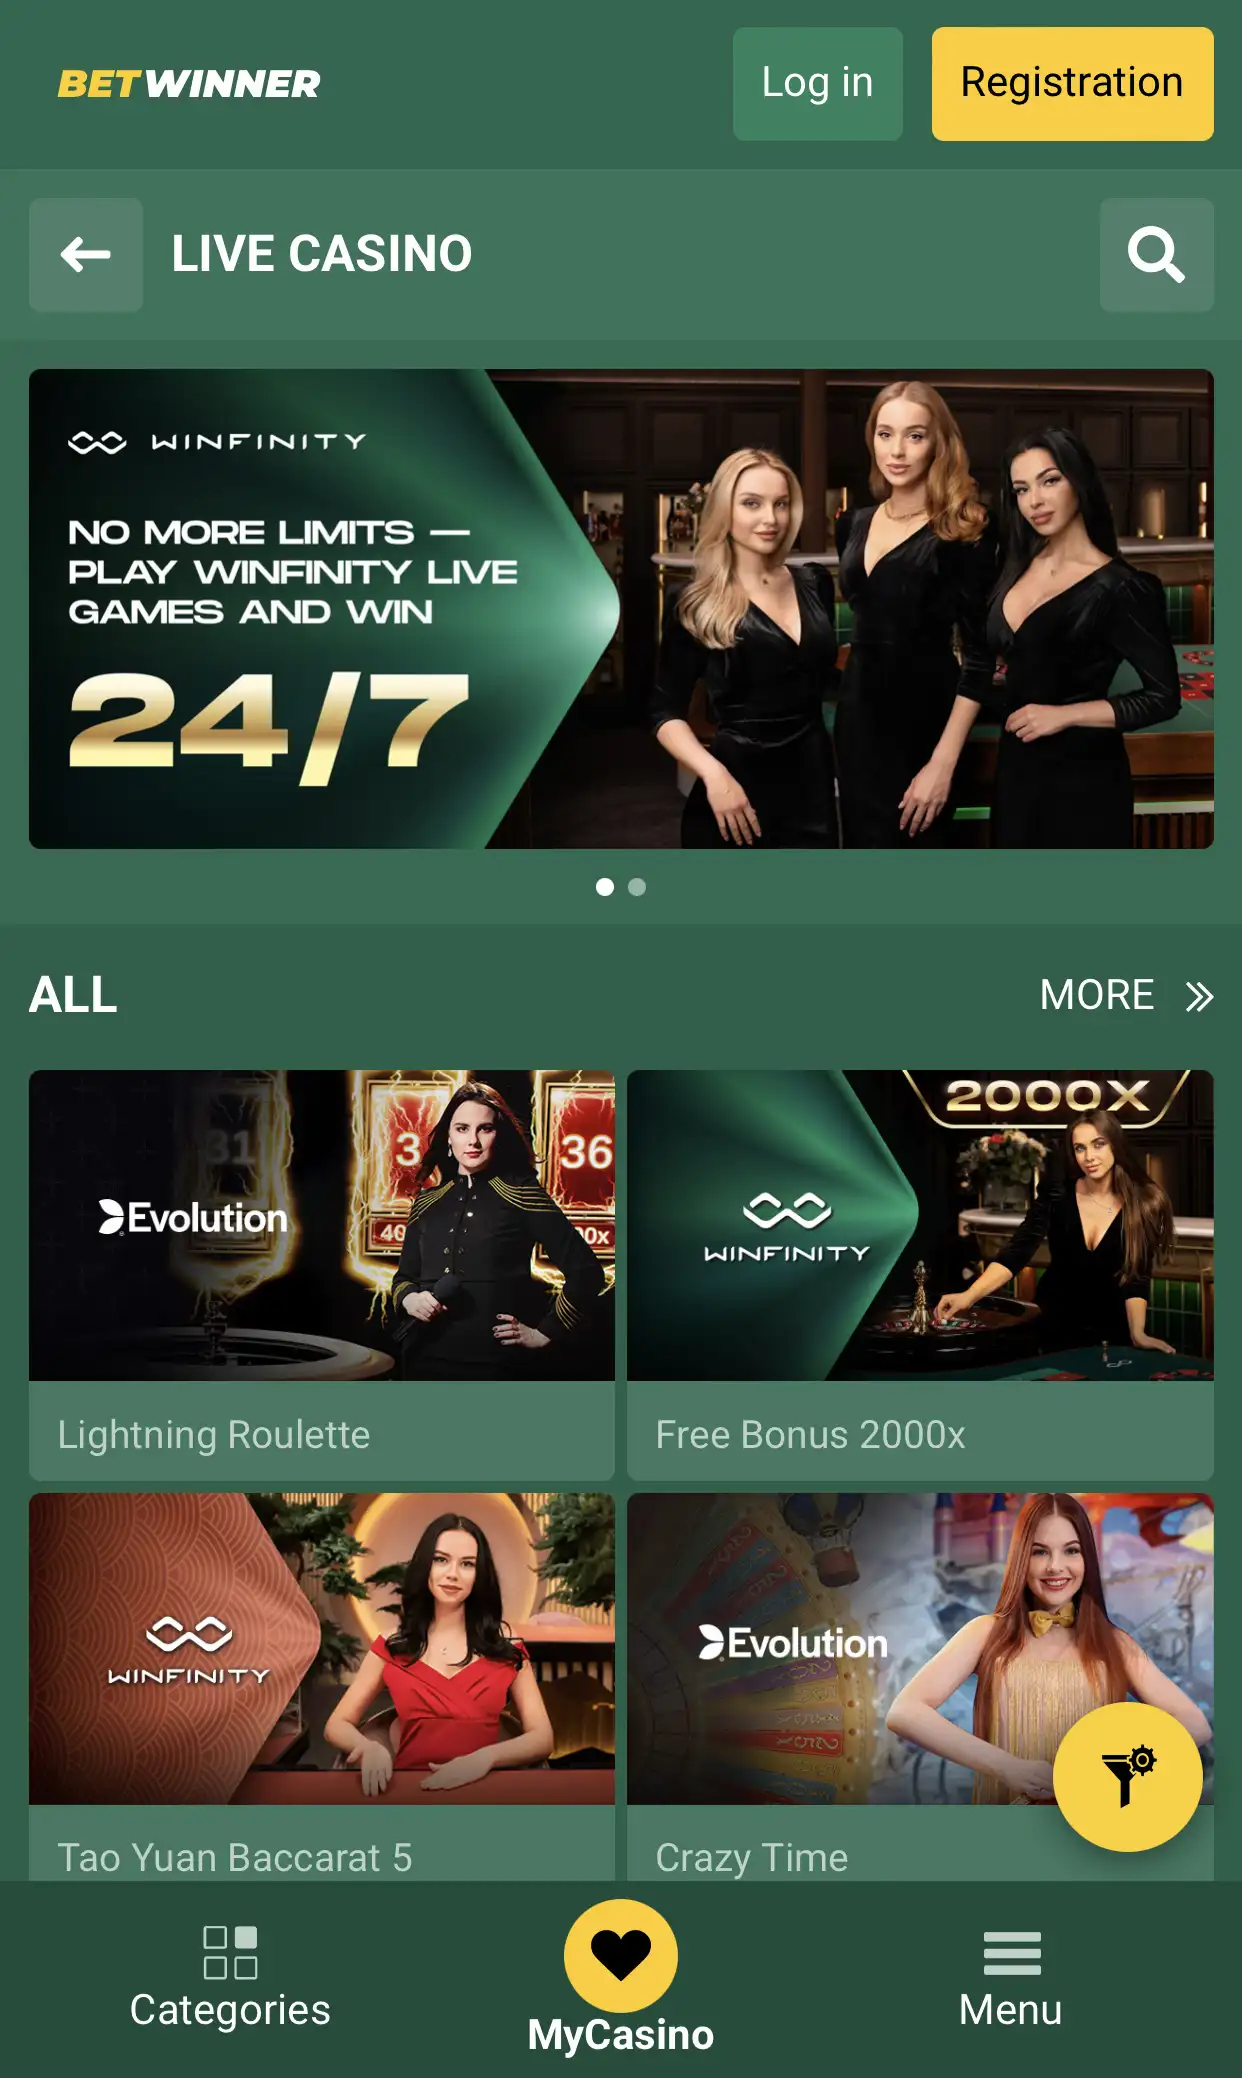 The live casino section allows you to play games in real time.